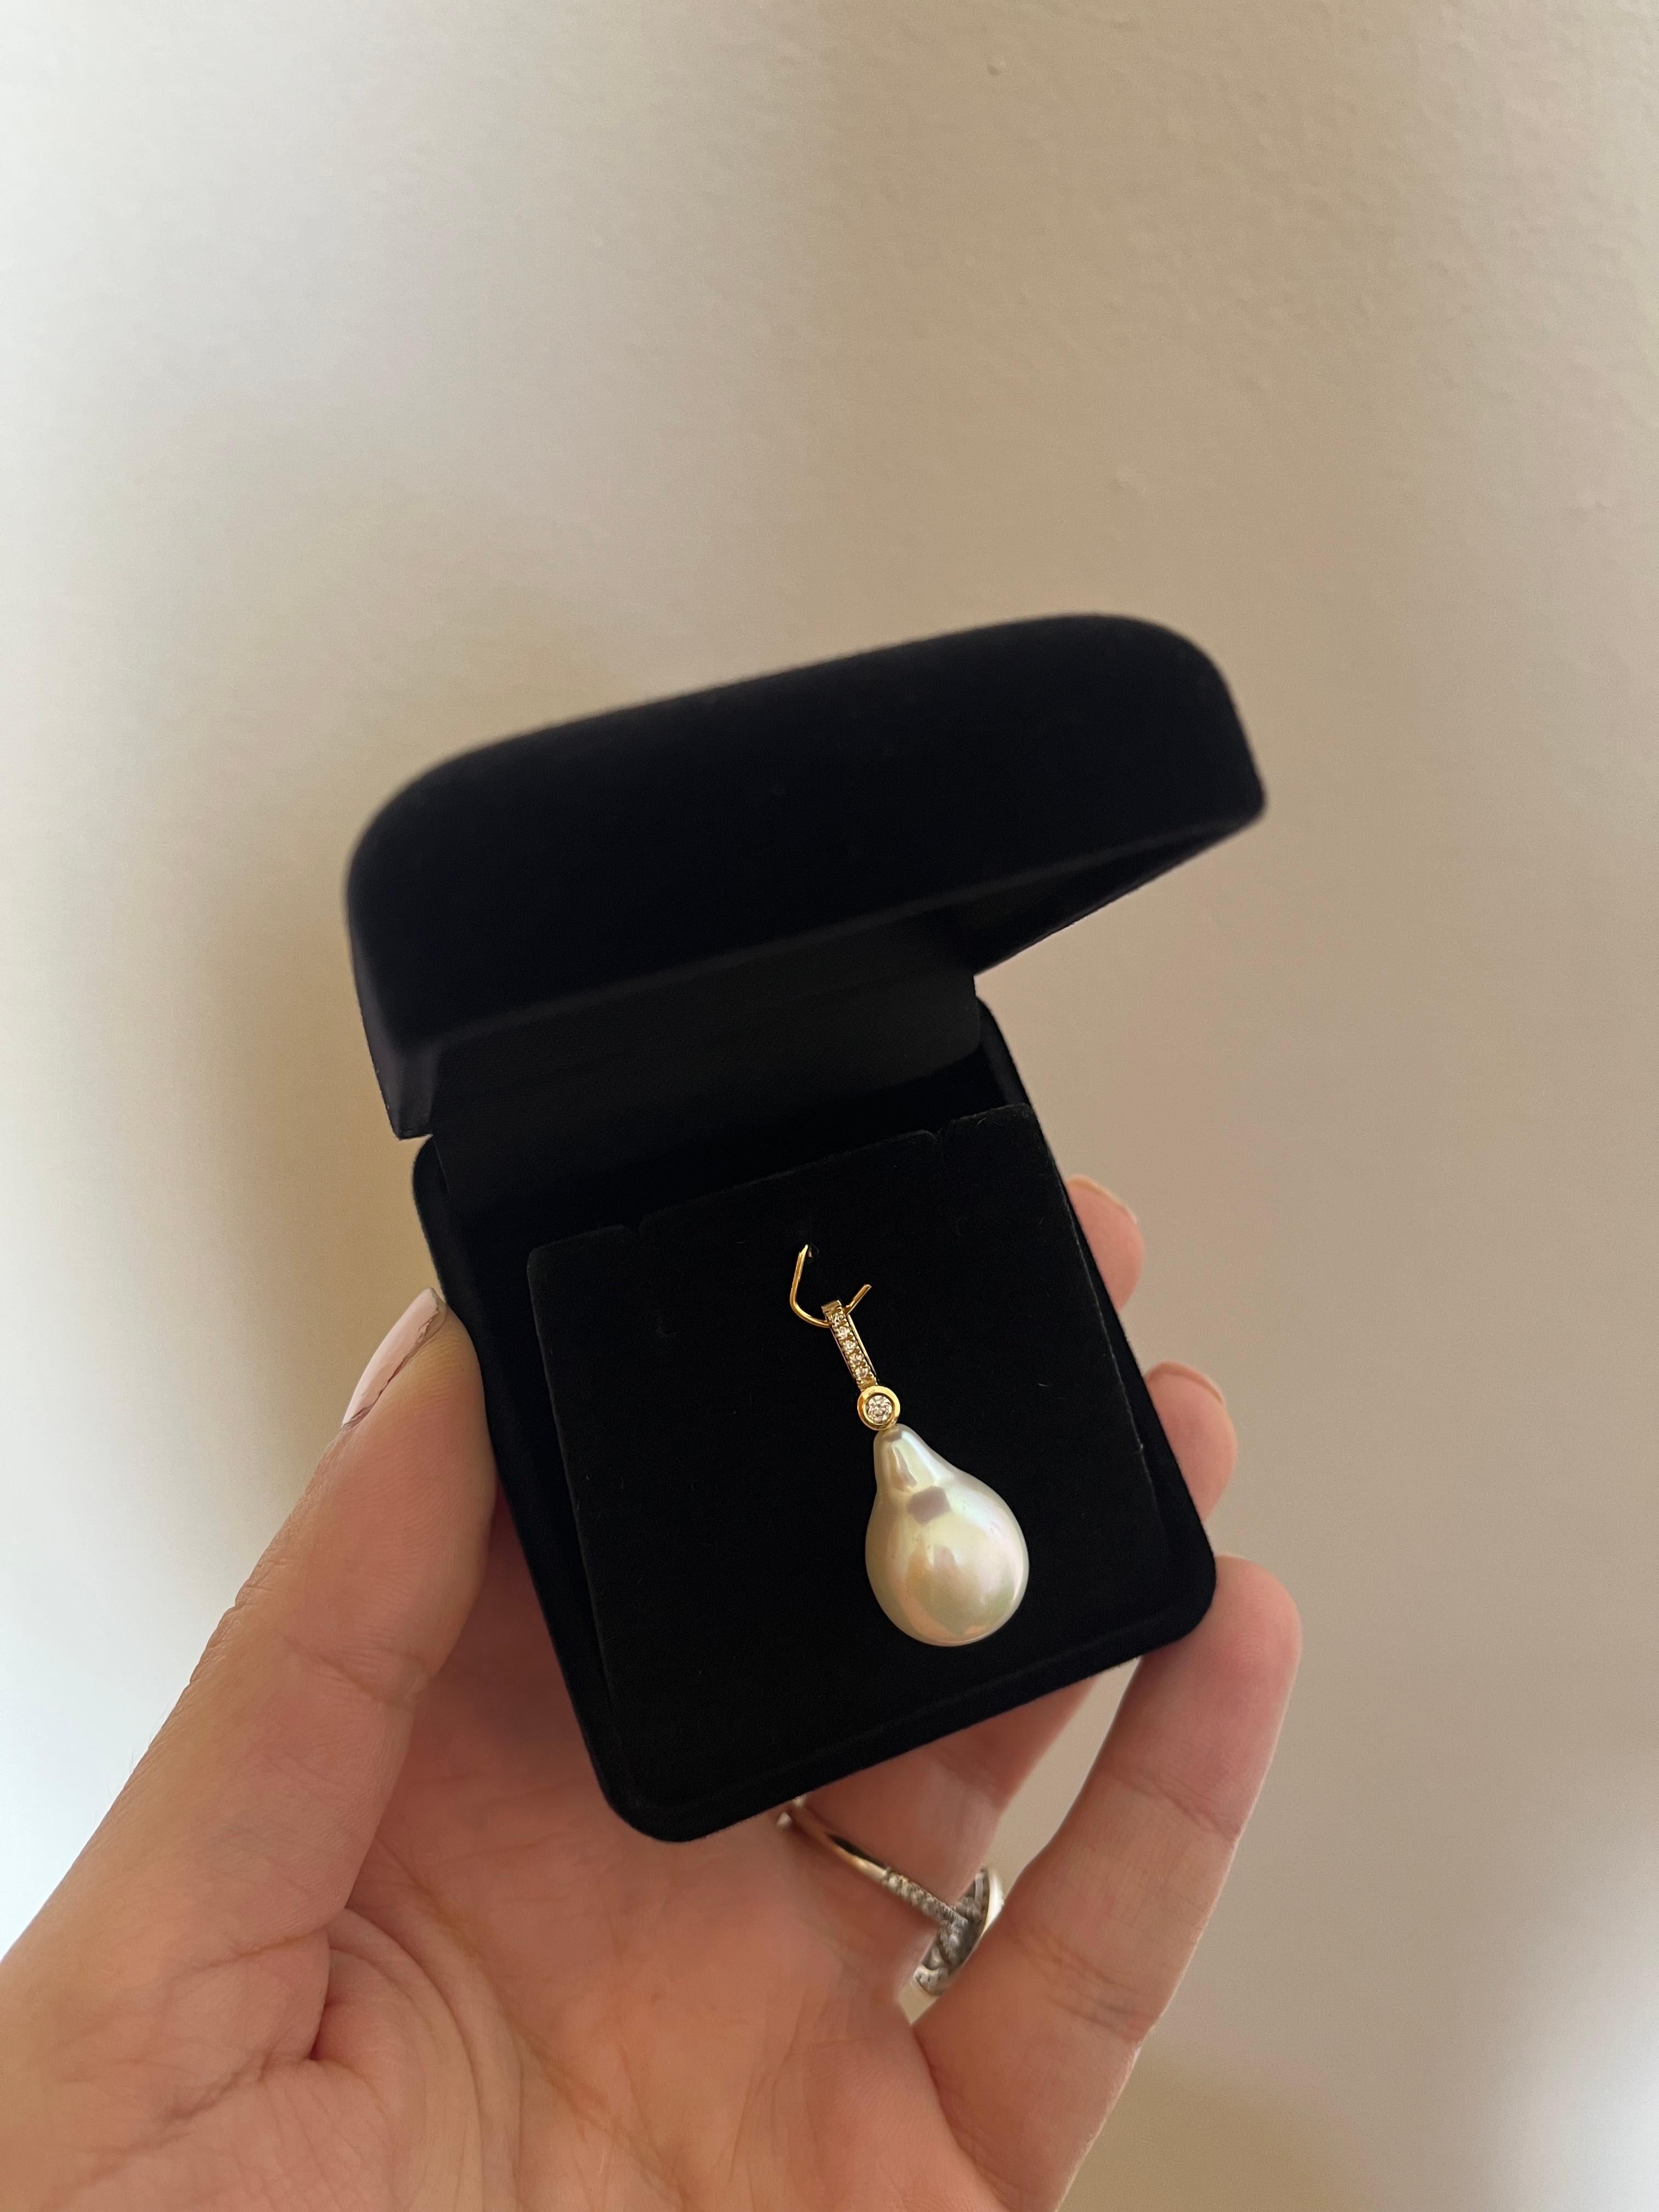 Our Baroque Pearl Charm with Diamonds features a baroque drop shaped pearl  accentuated by glimmering diamonds. The simplicity in its silhouette combined with the high-quality materials used, make this the ultimate day to night luxury piece. The